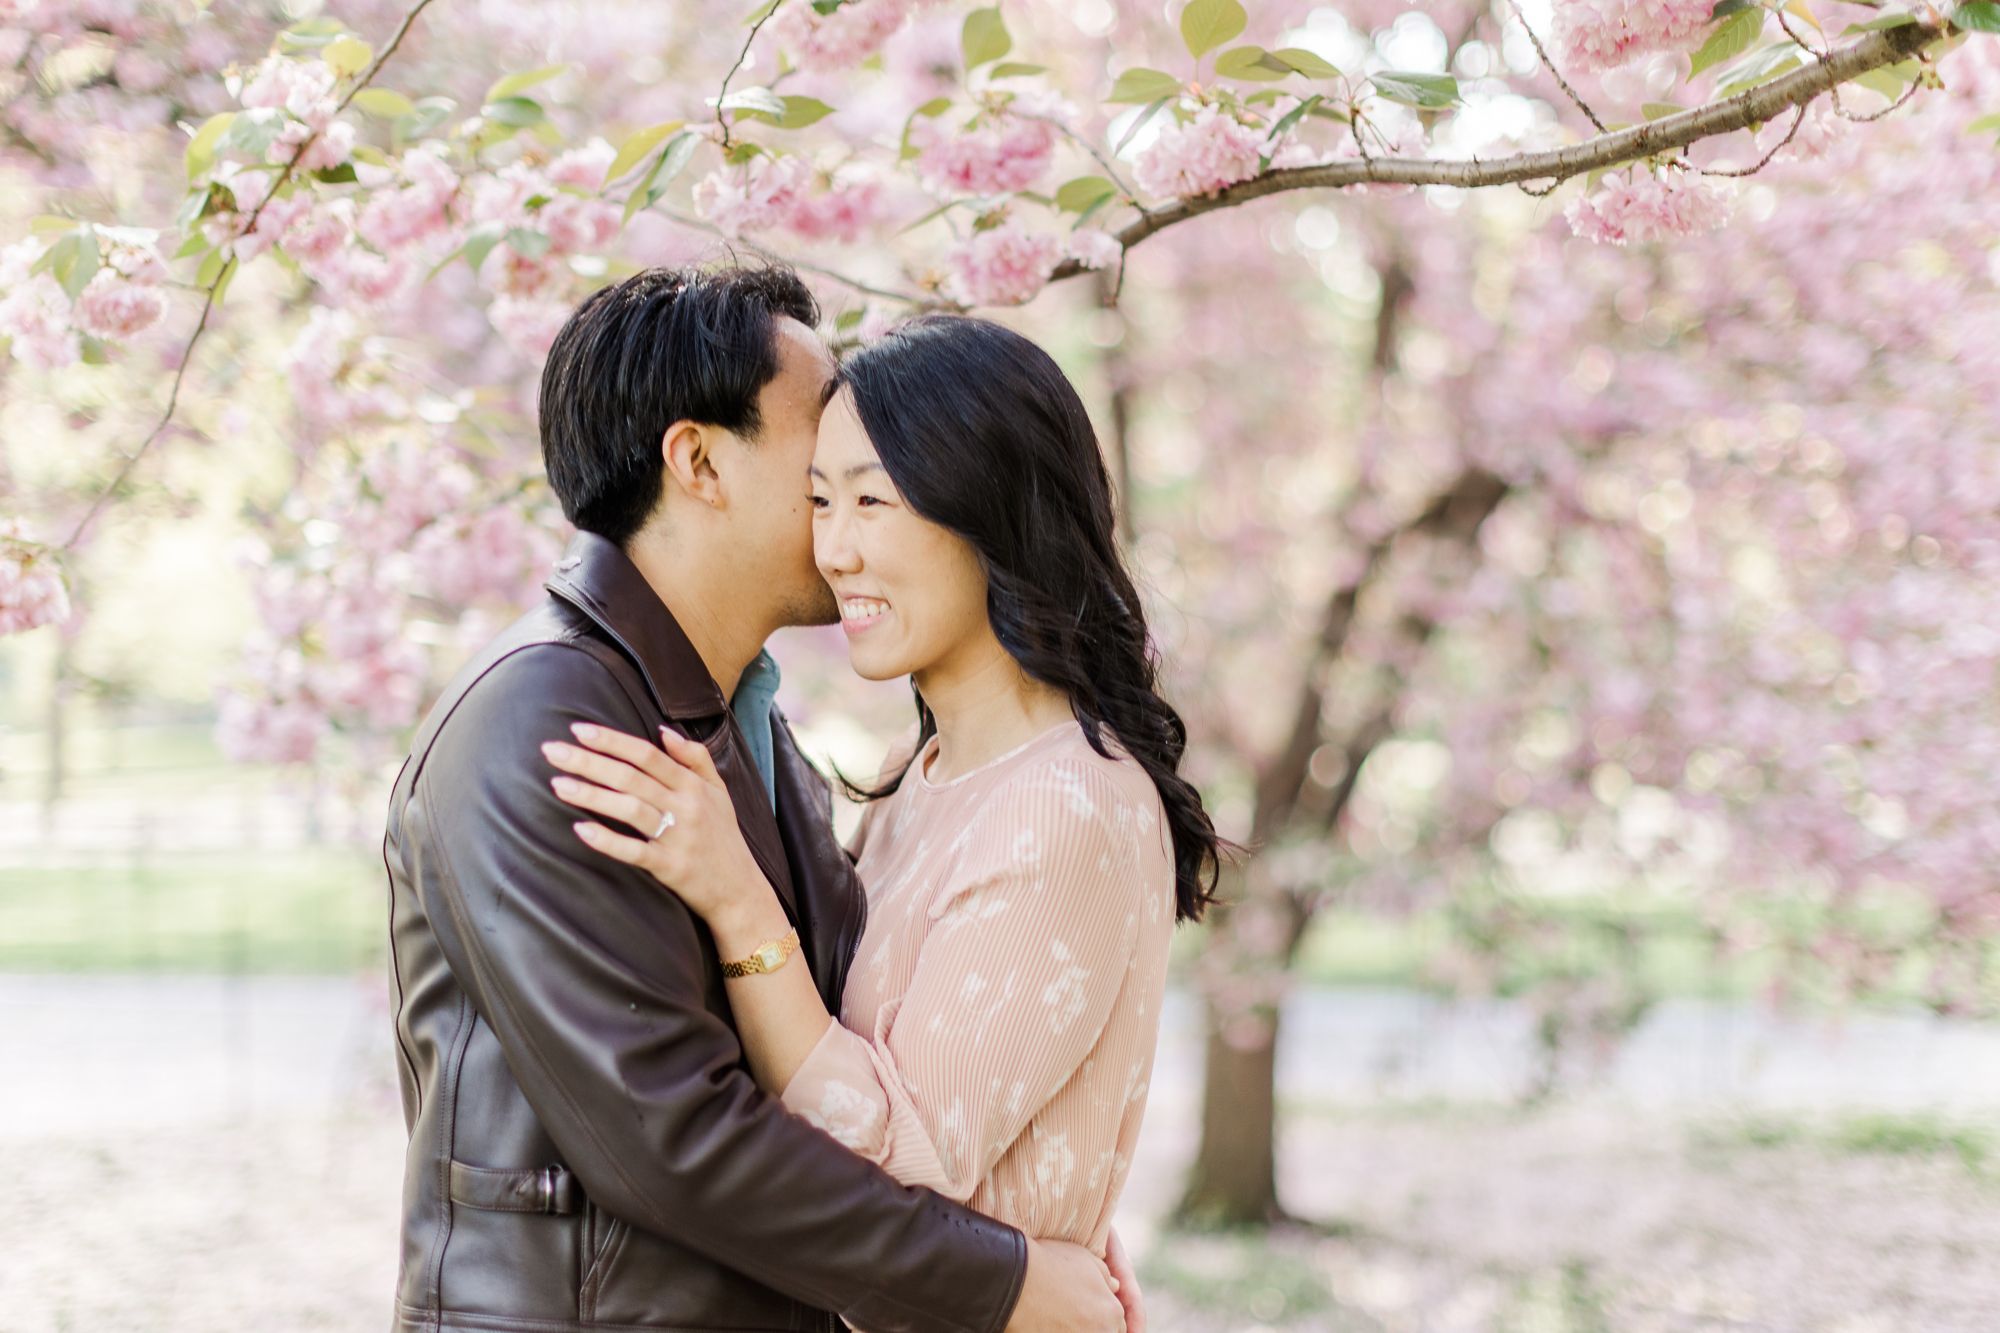 Bright Engagement Photos With Cherry Blossoms in NYC